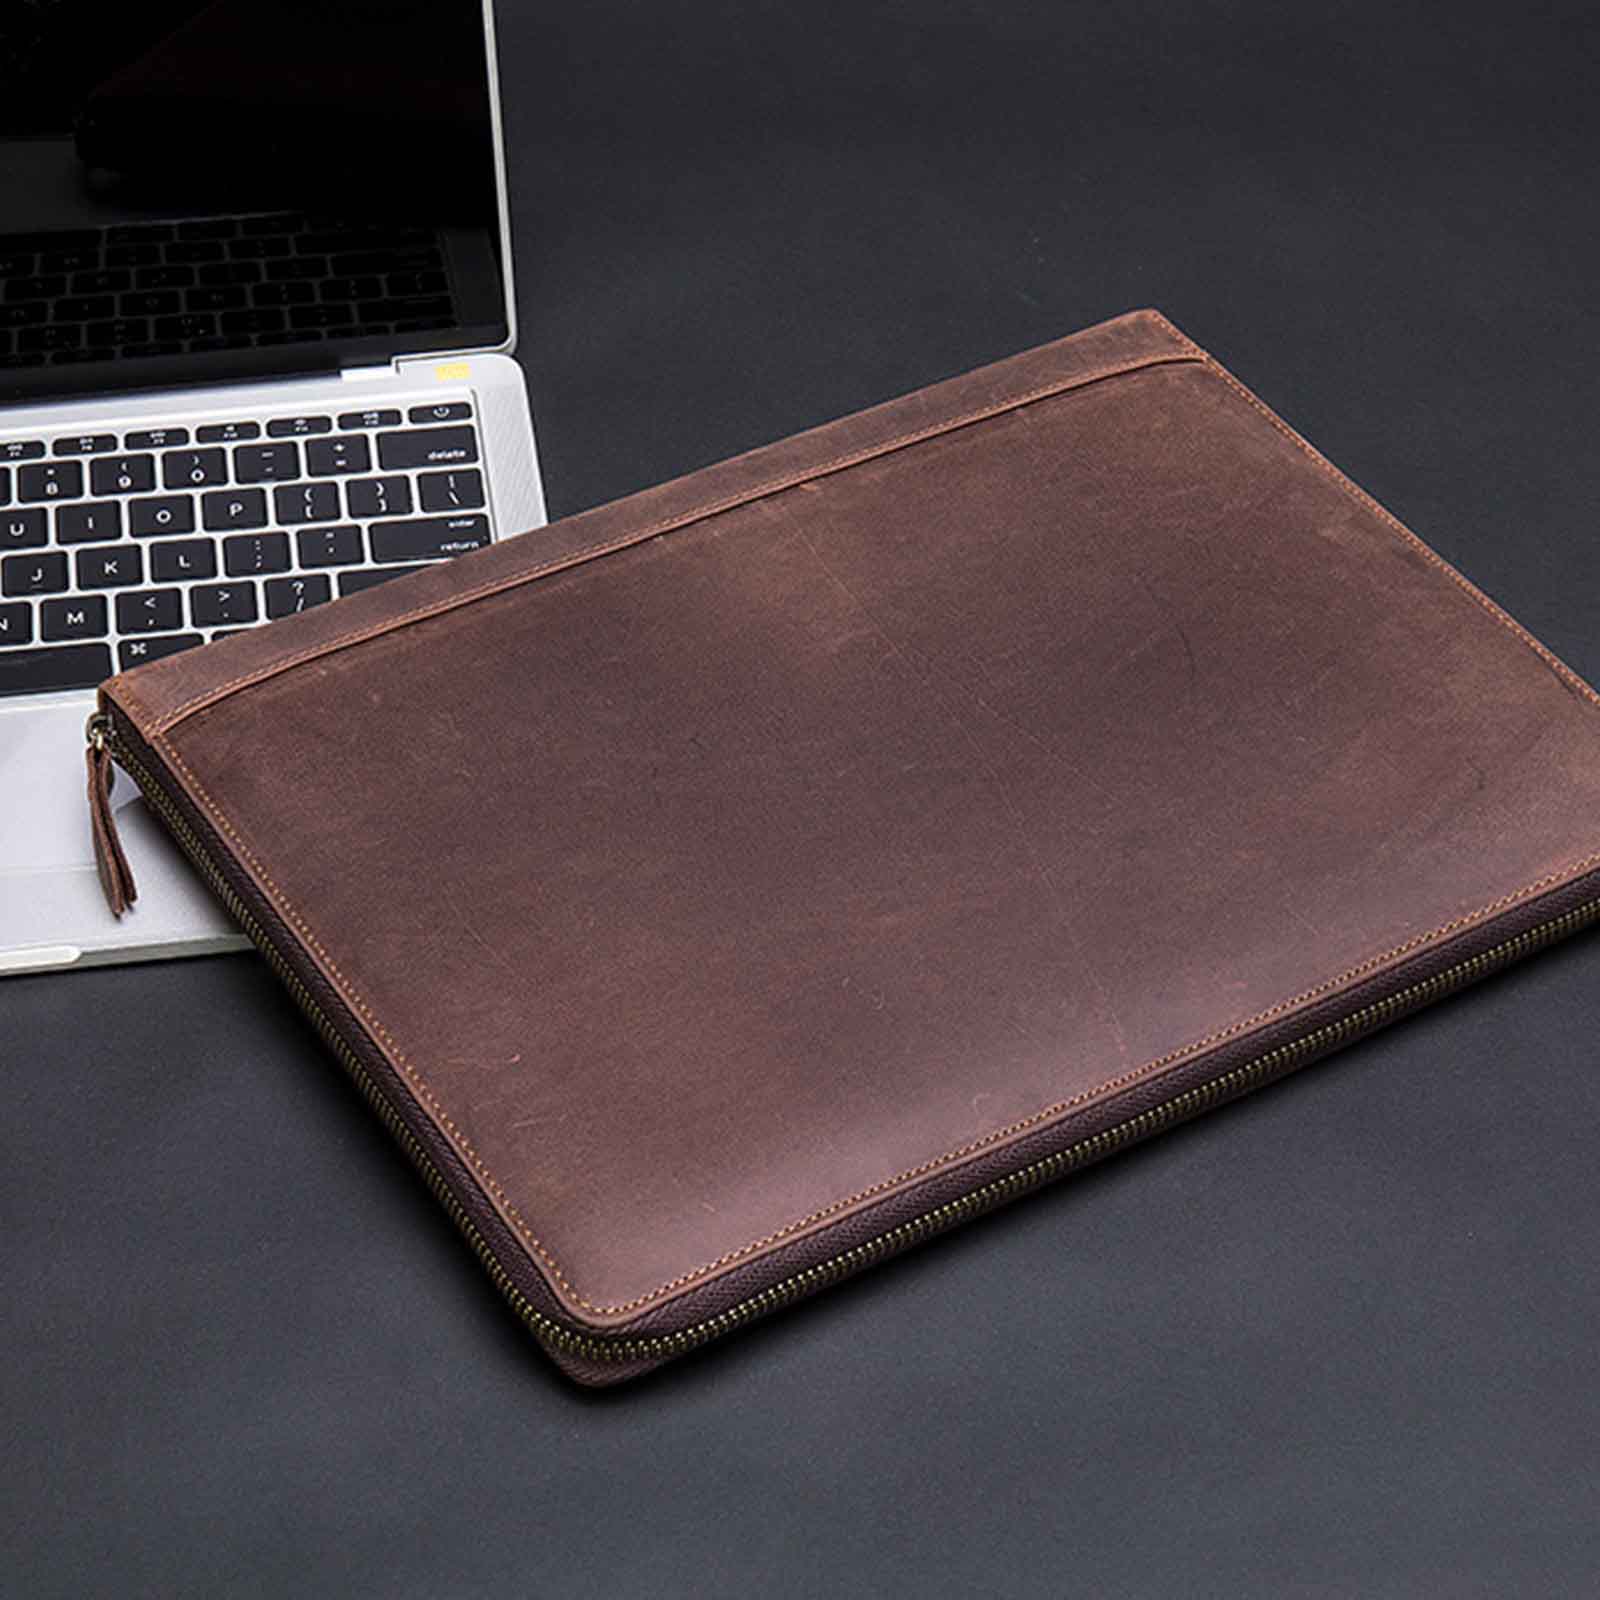 All In One Vintage Ipad Case With Pencil Holder